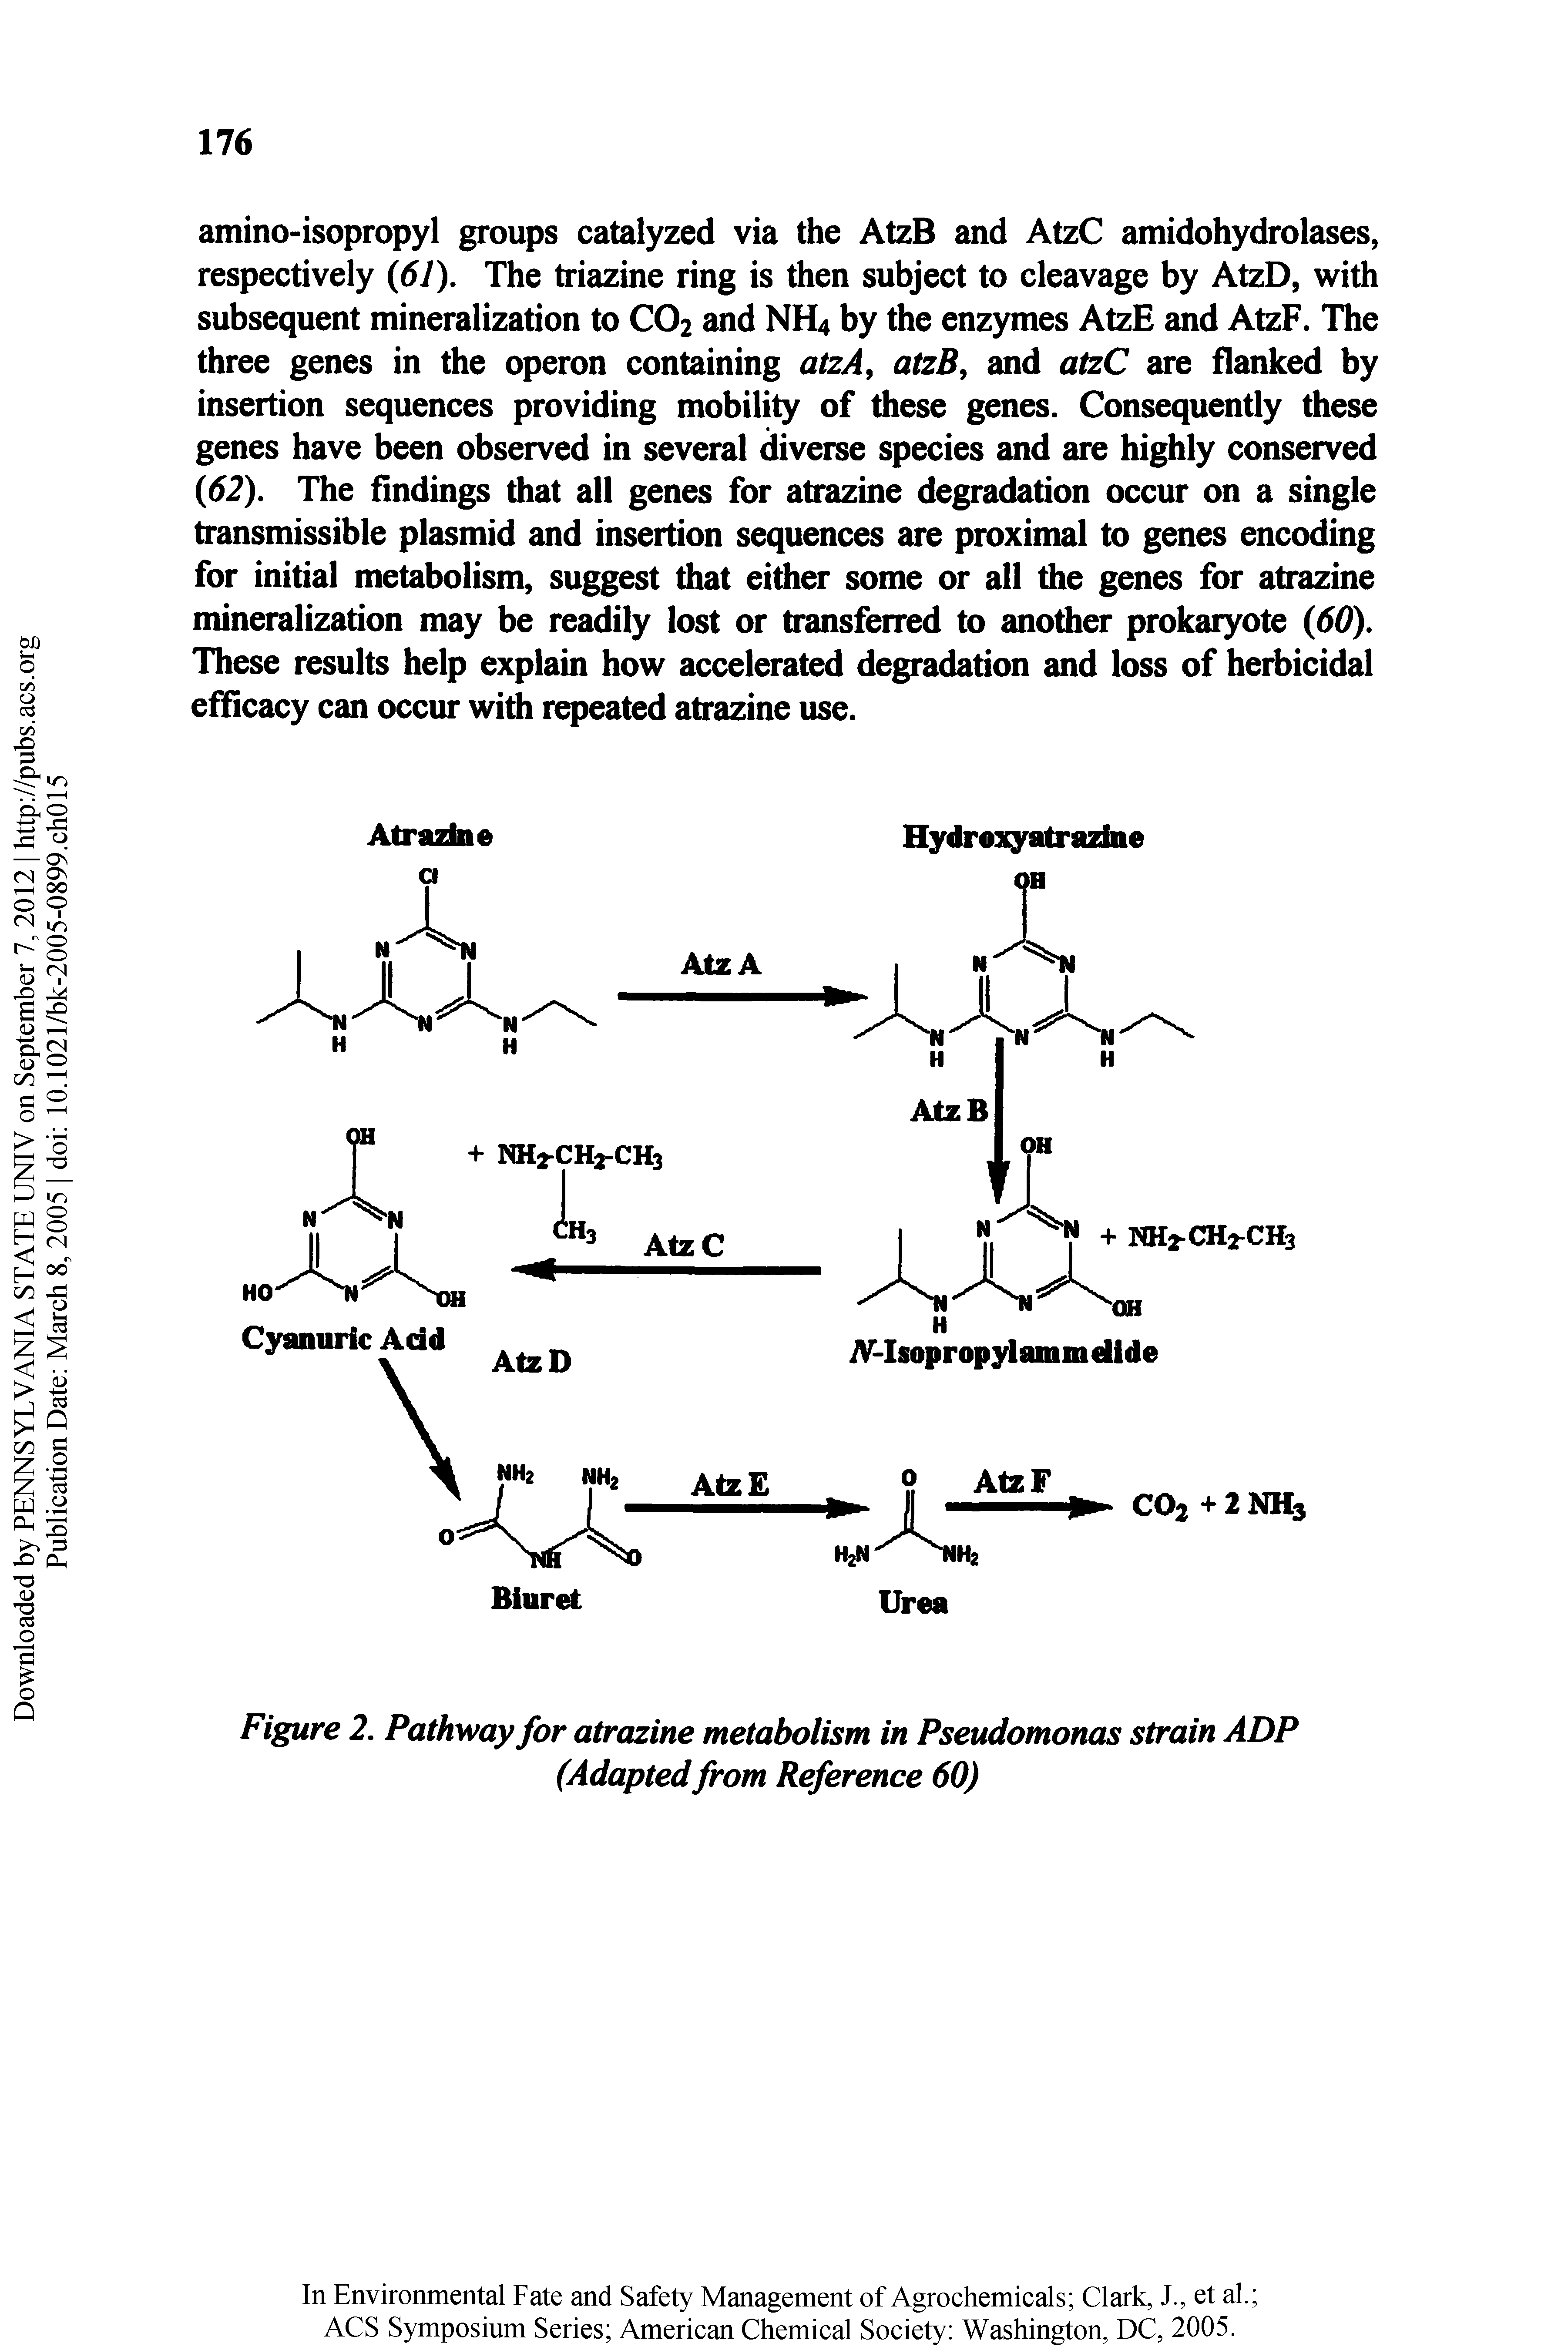 Figure 2. Pathway for atrazine metabolism in Pseudomonas strain ADP (Adapted from Reference 60)...